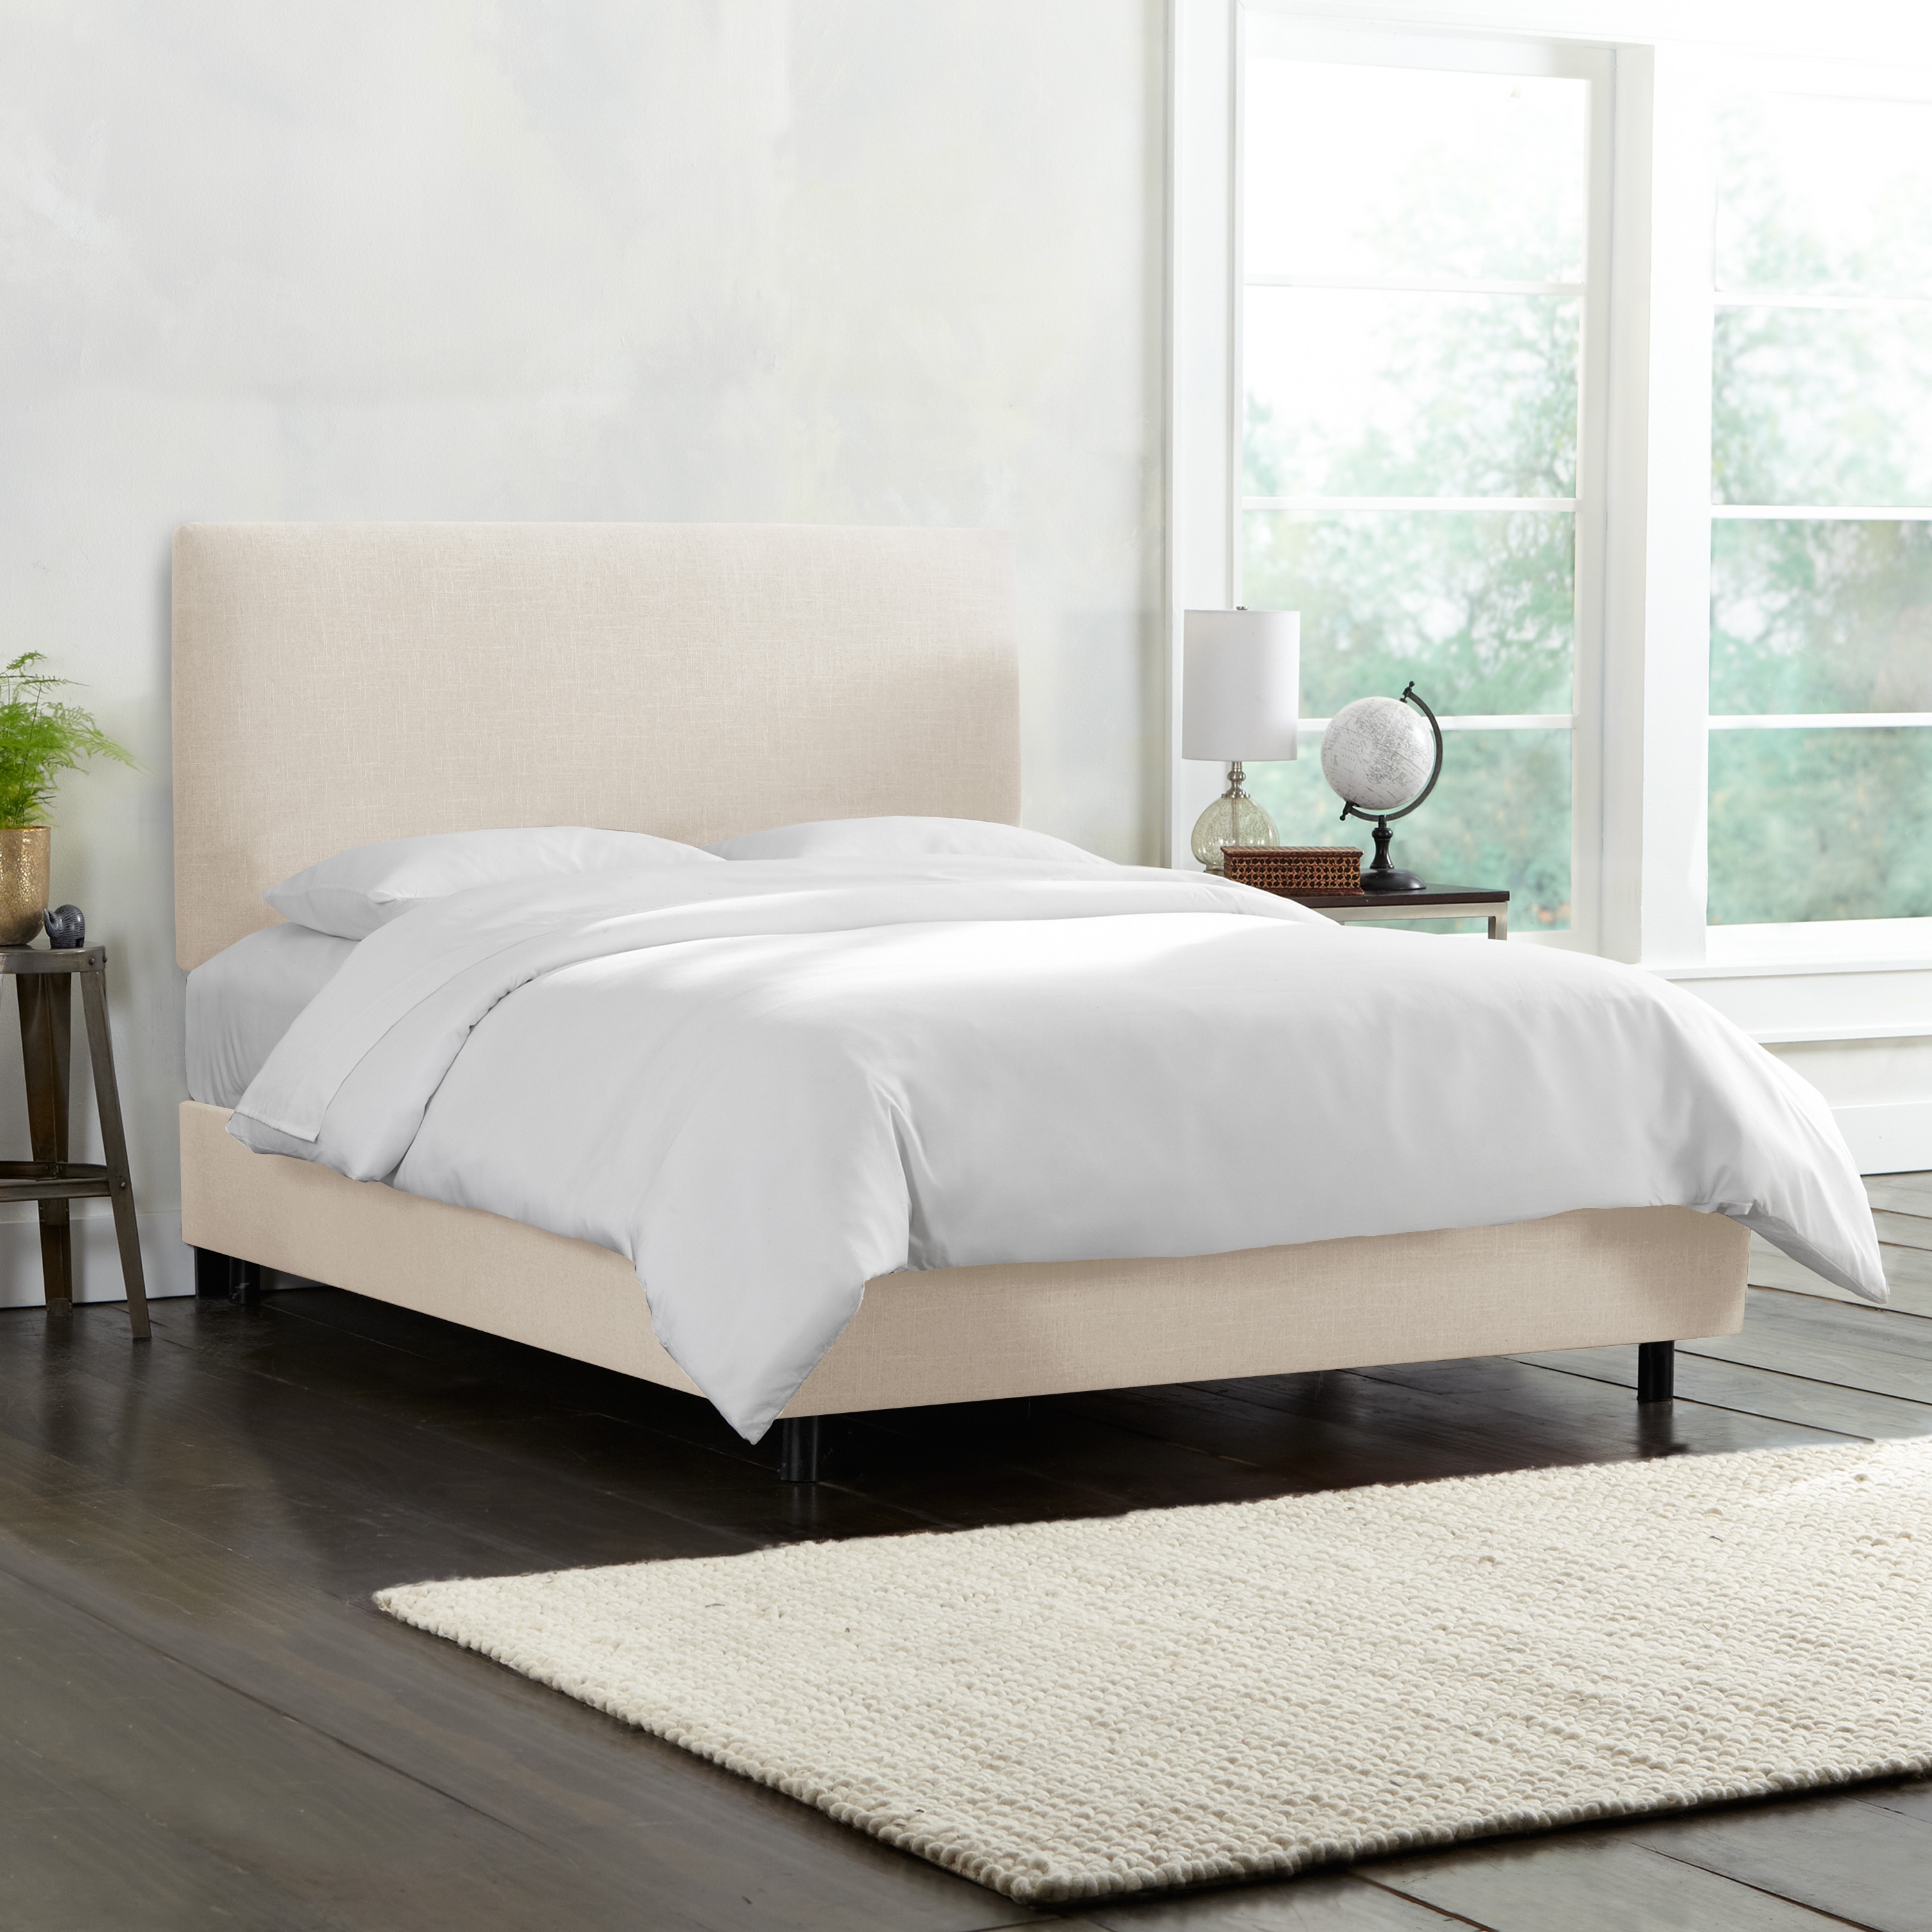 King Sawyer Bed in Linen Talc - Image 6